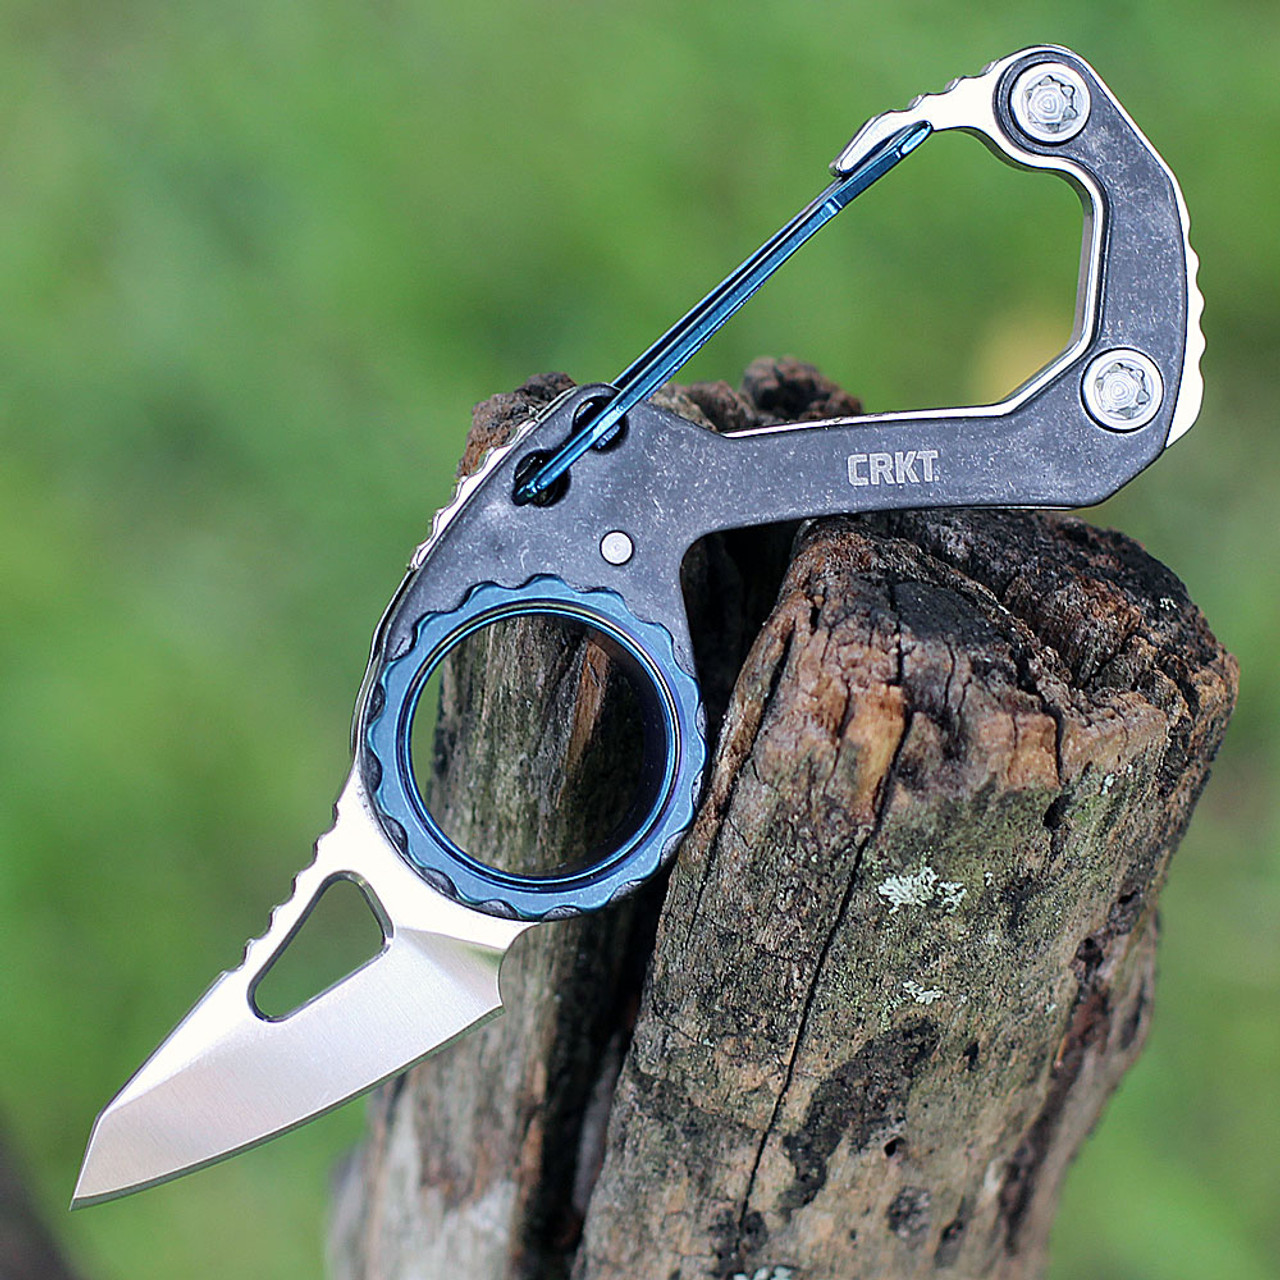 Columbia River CRKT Compano Carabiner Folding Knife (9083) - 1.44" Satin Sheepsfoot Blade, Black Stainless Steel W/ Blue Accents Handle